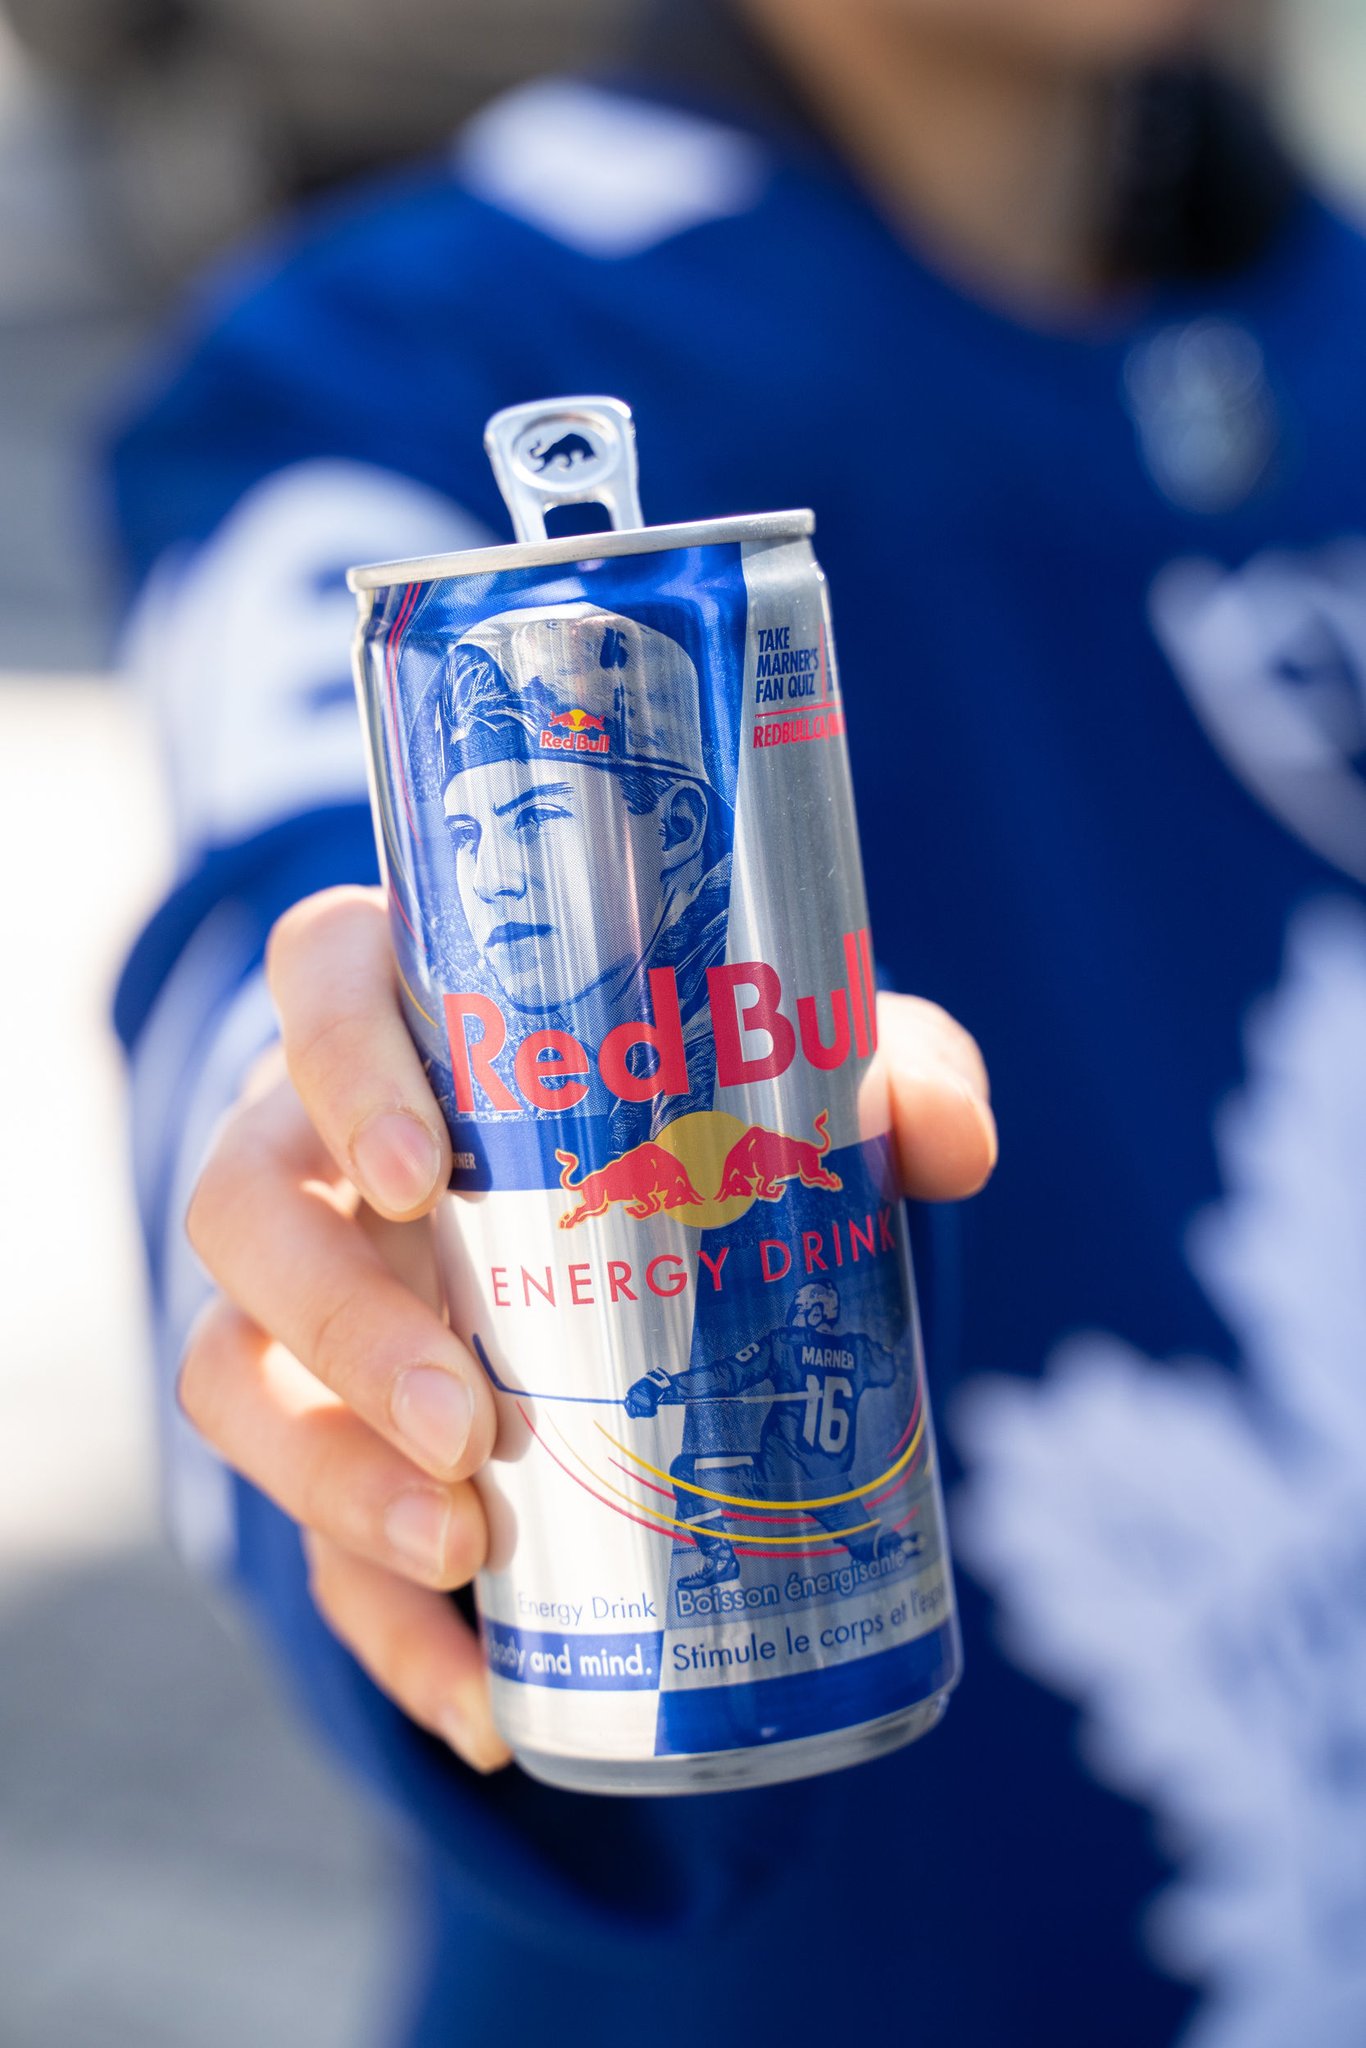 Mitchell Marner Proud To Announce My Limited Edition Red Bull Can Is Back And Available Across Ontario Pick One Up Today And Find Out What Type Of Fan You Are